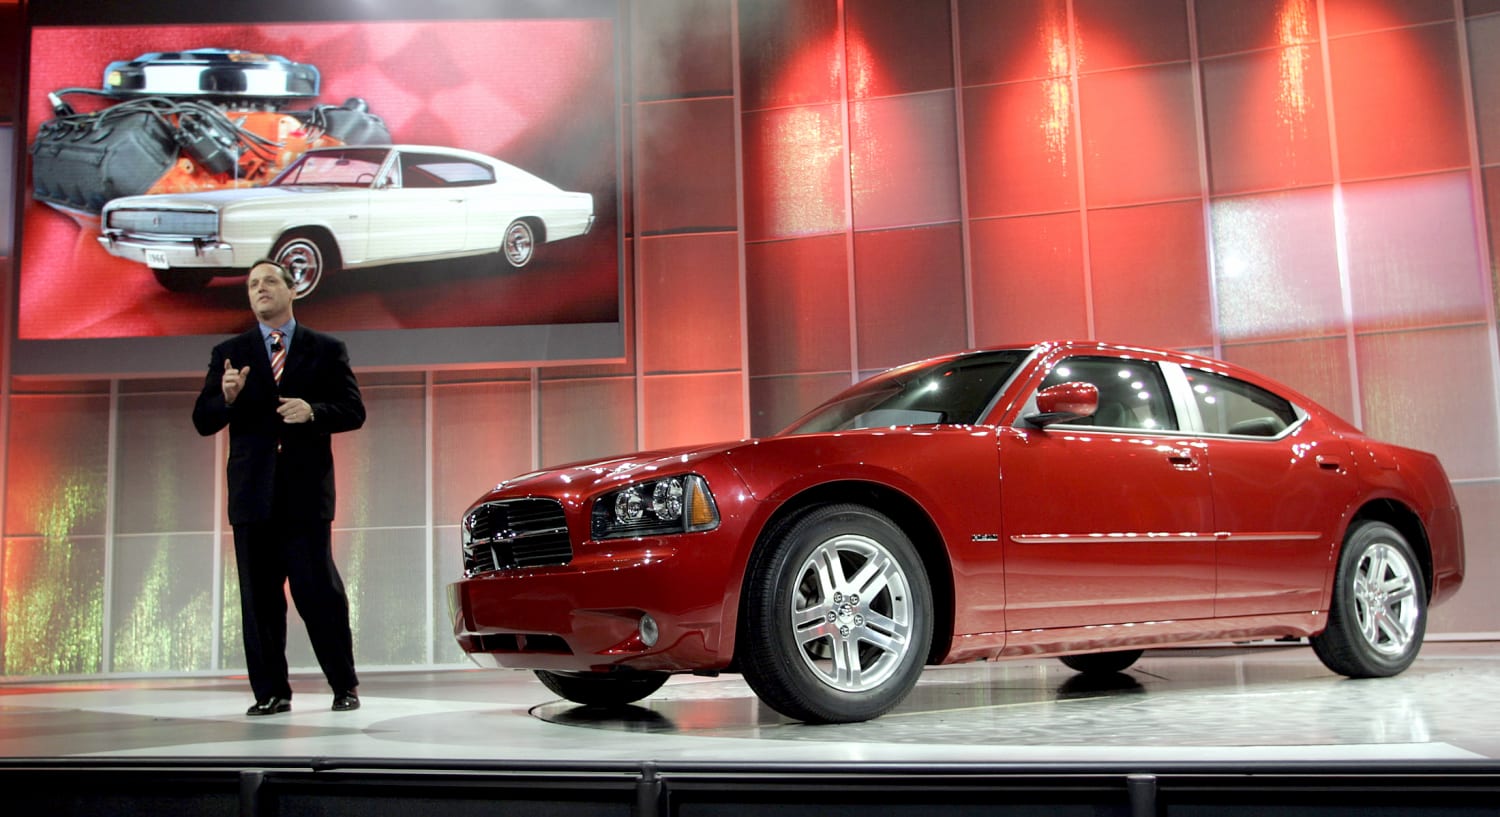 Gone in 60 Seconds? Muscle cars top list of most stolen vehicles